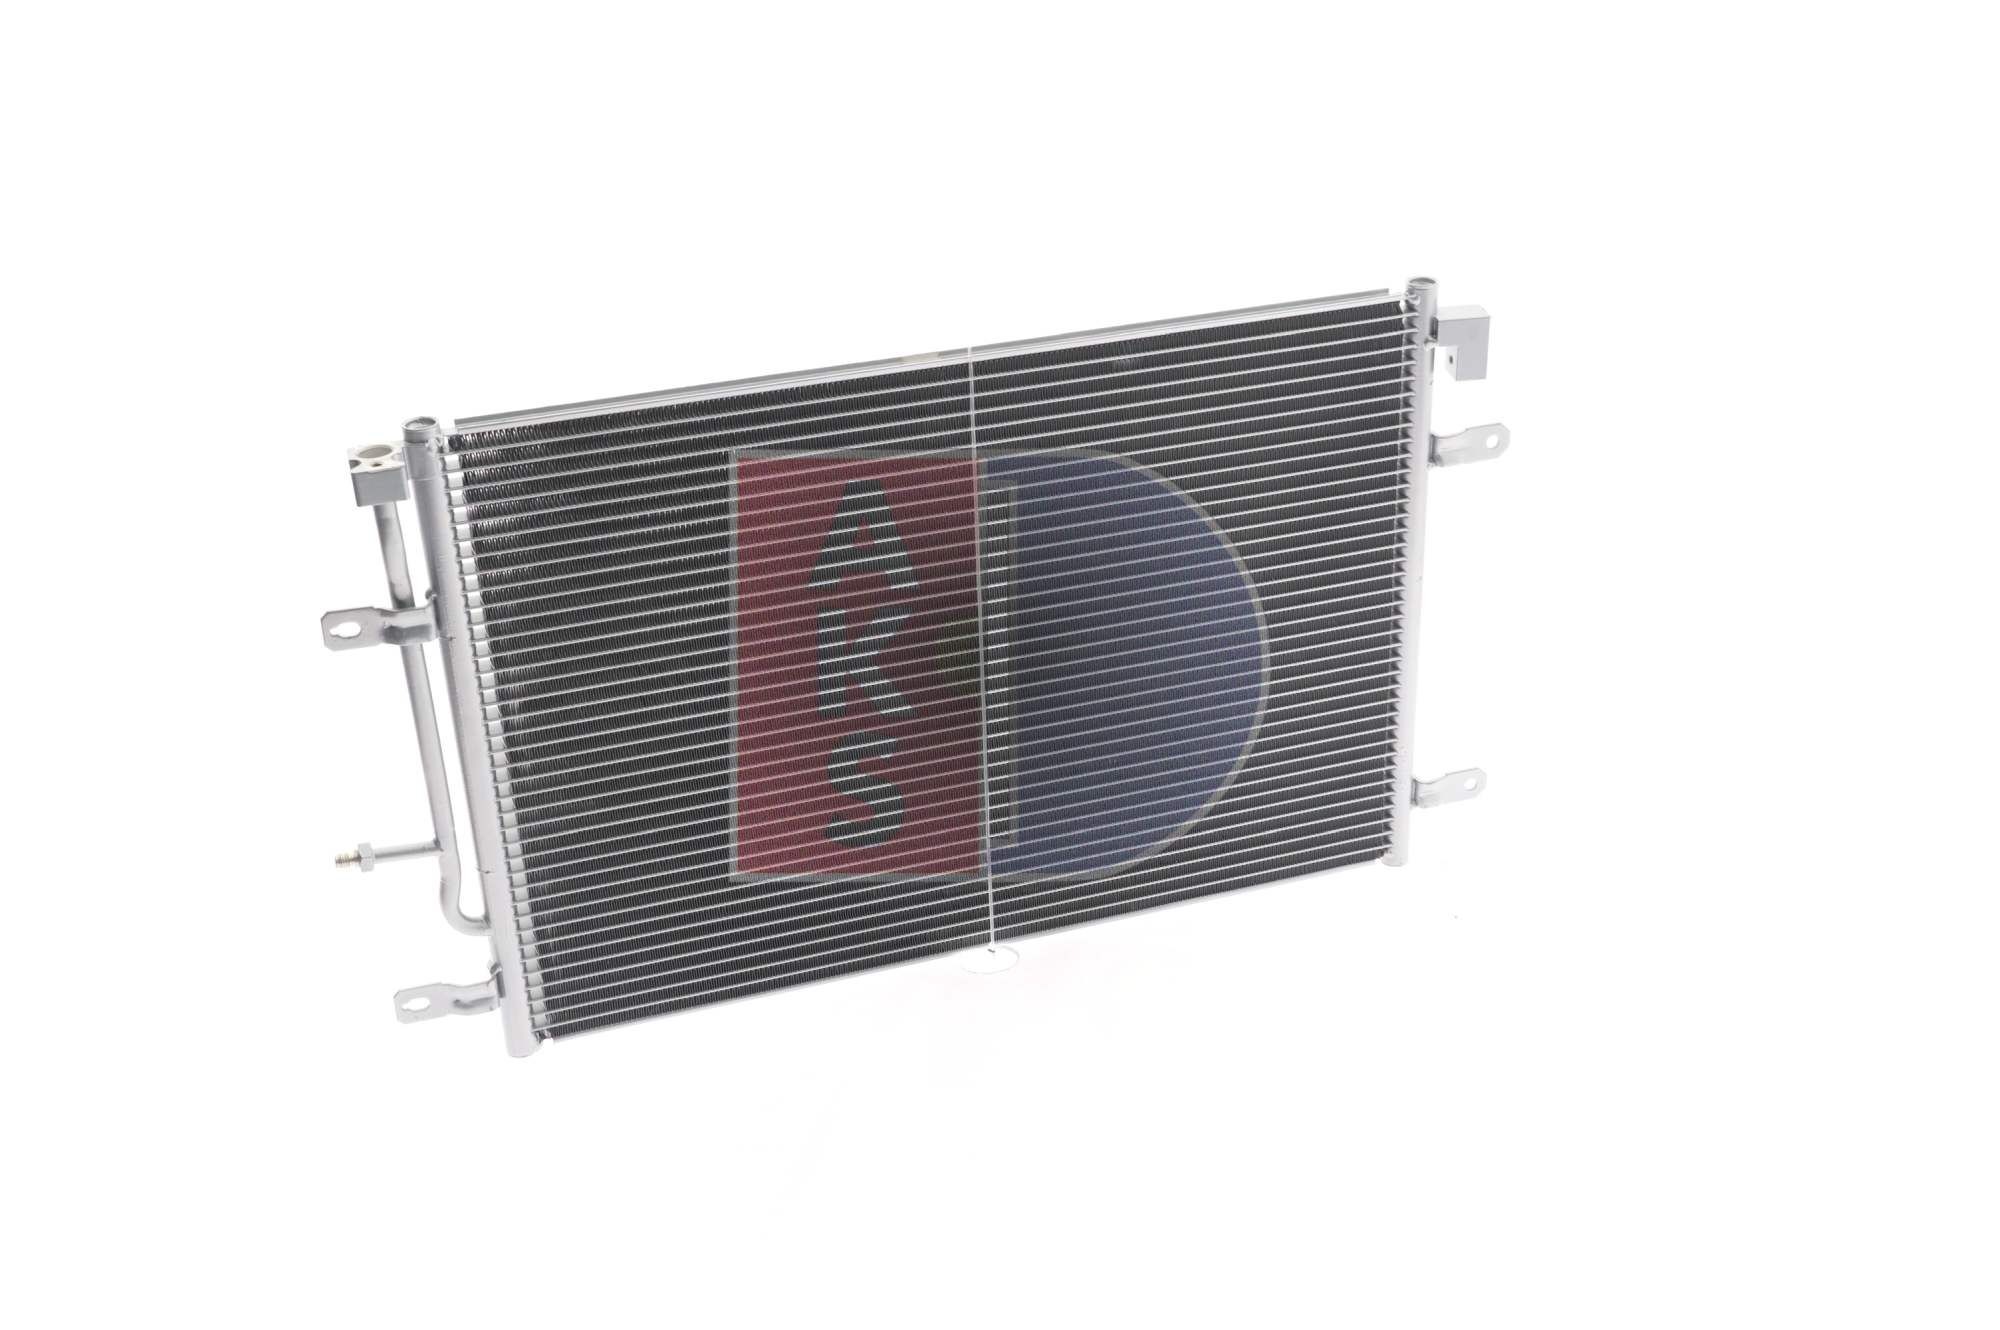 Air conditioning condenser 482012N from AKS DASIS